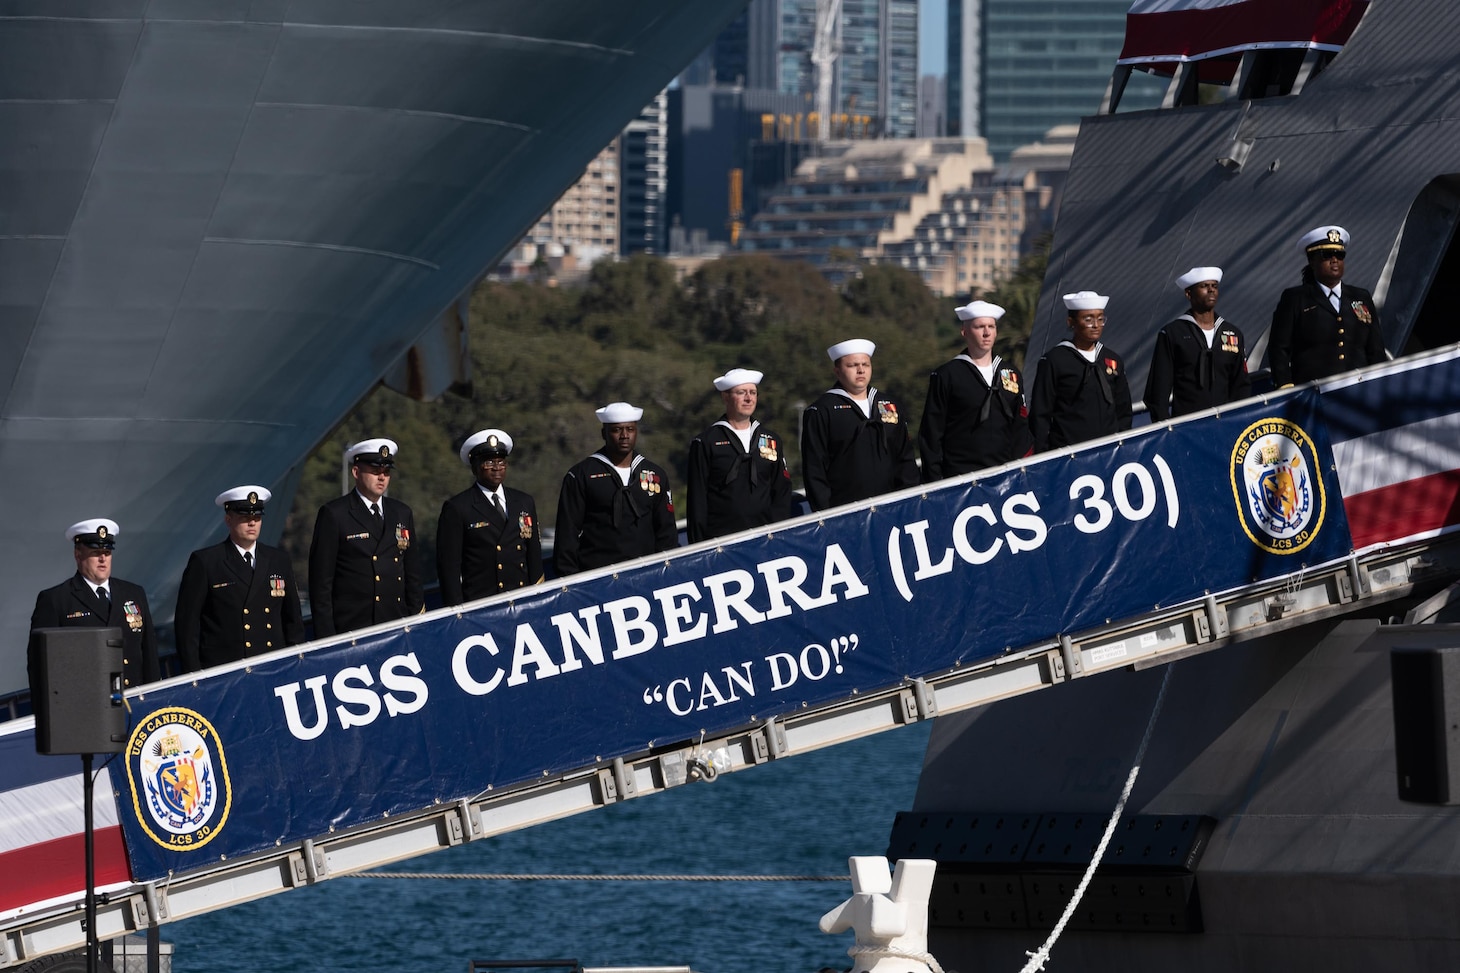 The crew of the Navy's newest Independence-variant littoral combat ship USS Canberra (LCS 30) brings the ship to life with sailors from the HMAS Canberra during the U.S. ship’s commissioning ceremony in Sydney, Australia July 22, 2023. Canberra is the second U.S. Navy ship named for Australia’s capital.